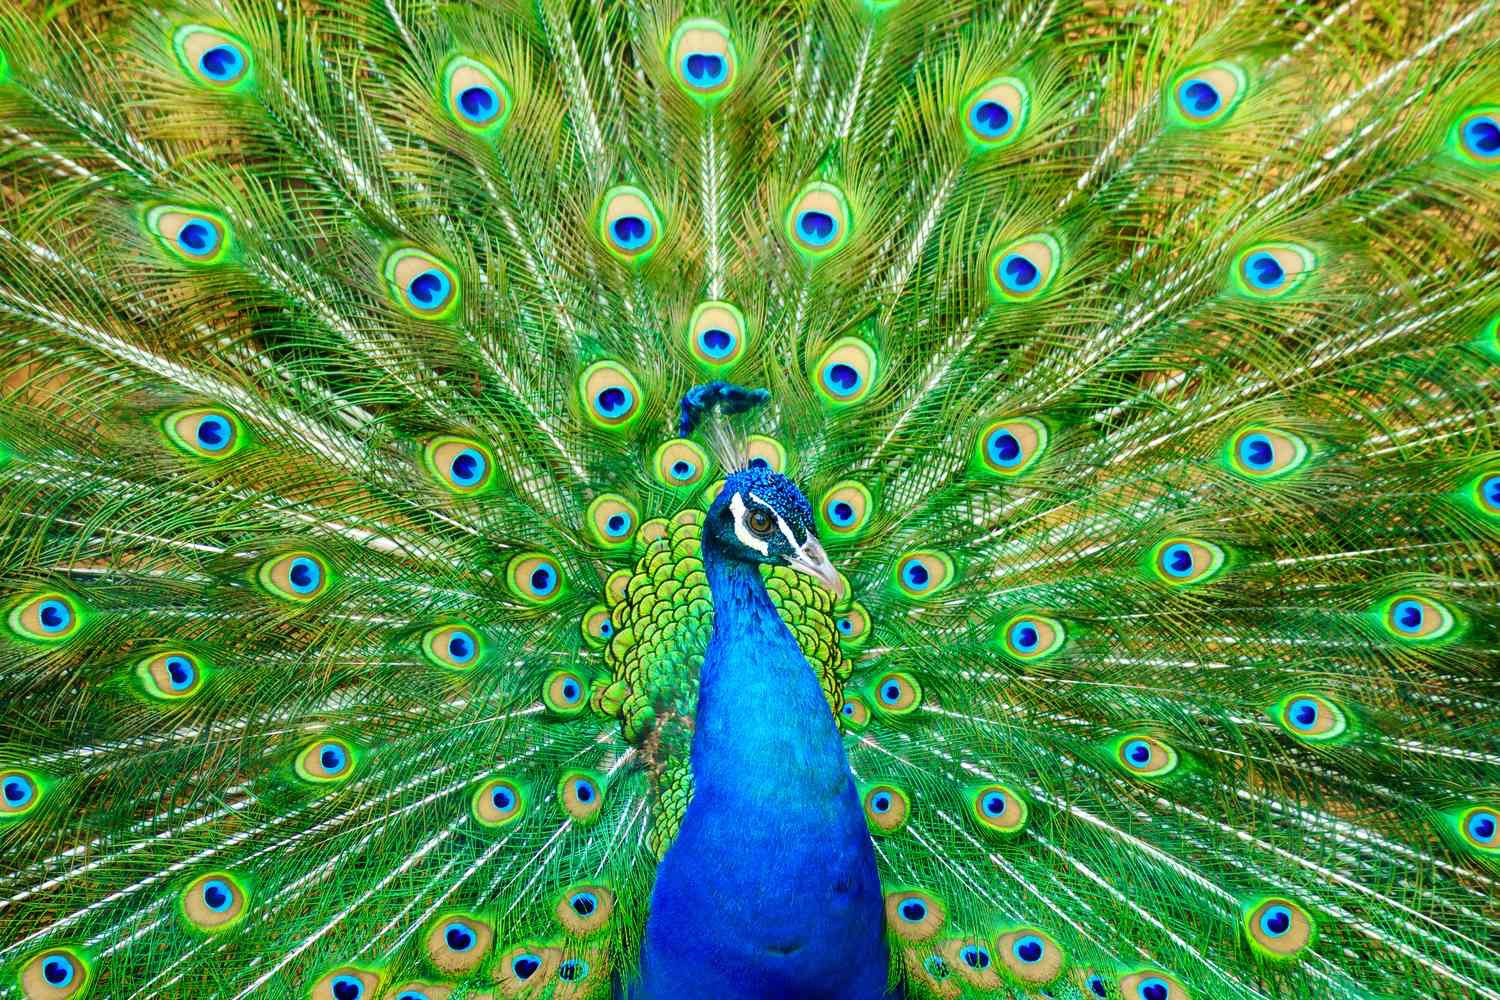 All the Peacock Is, Is But a Jest